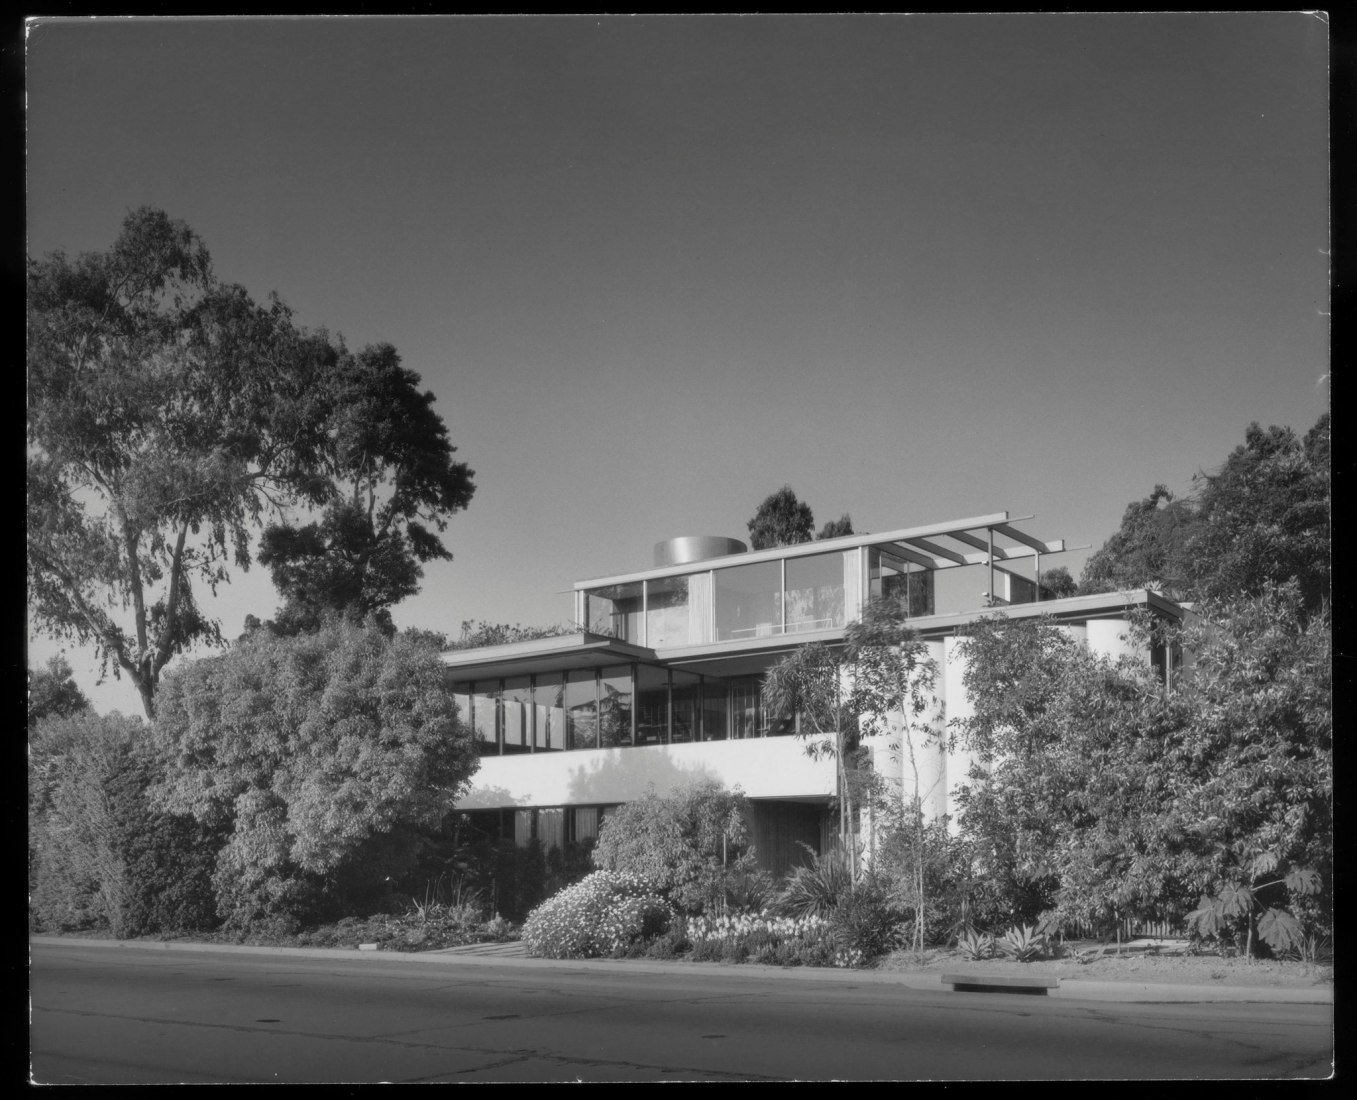 VDL Research House by Richard Neutra. © J. Paul Getty Trust. Getty Research Institute, Los Angeles (2004.R.10).